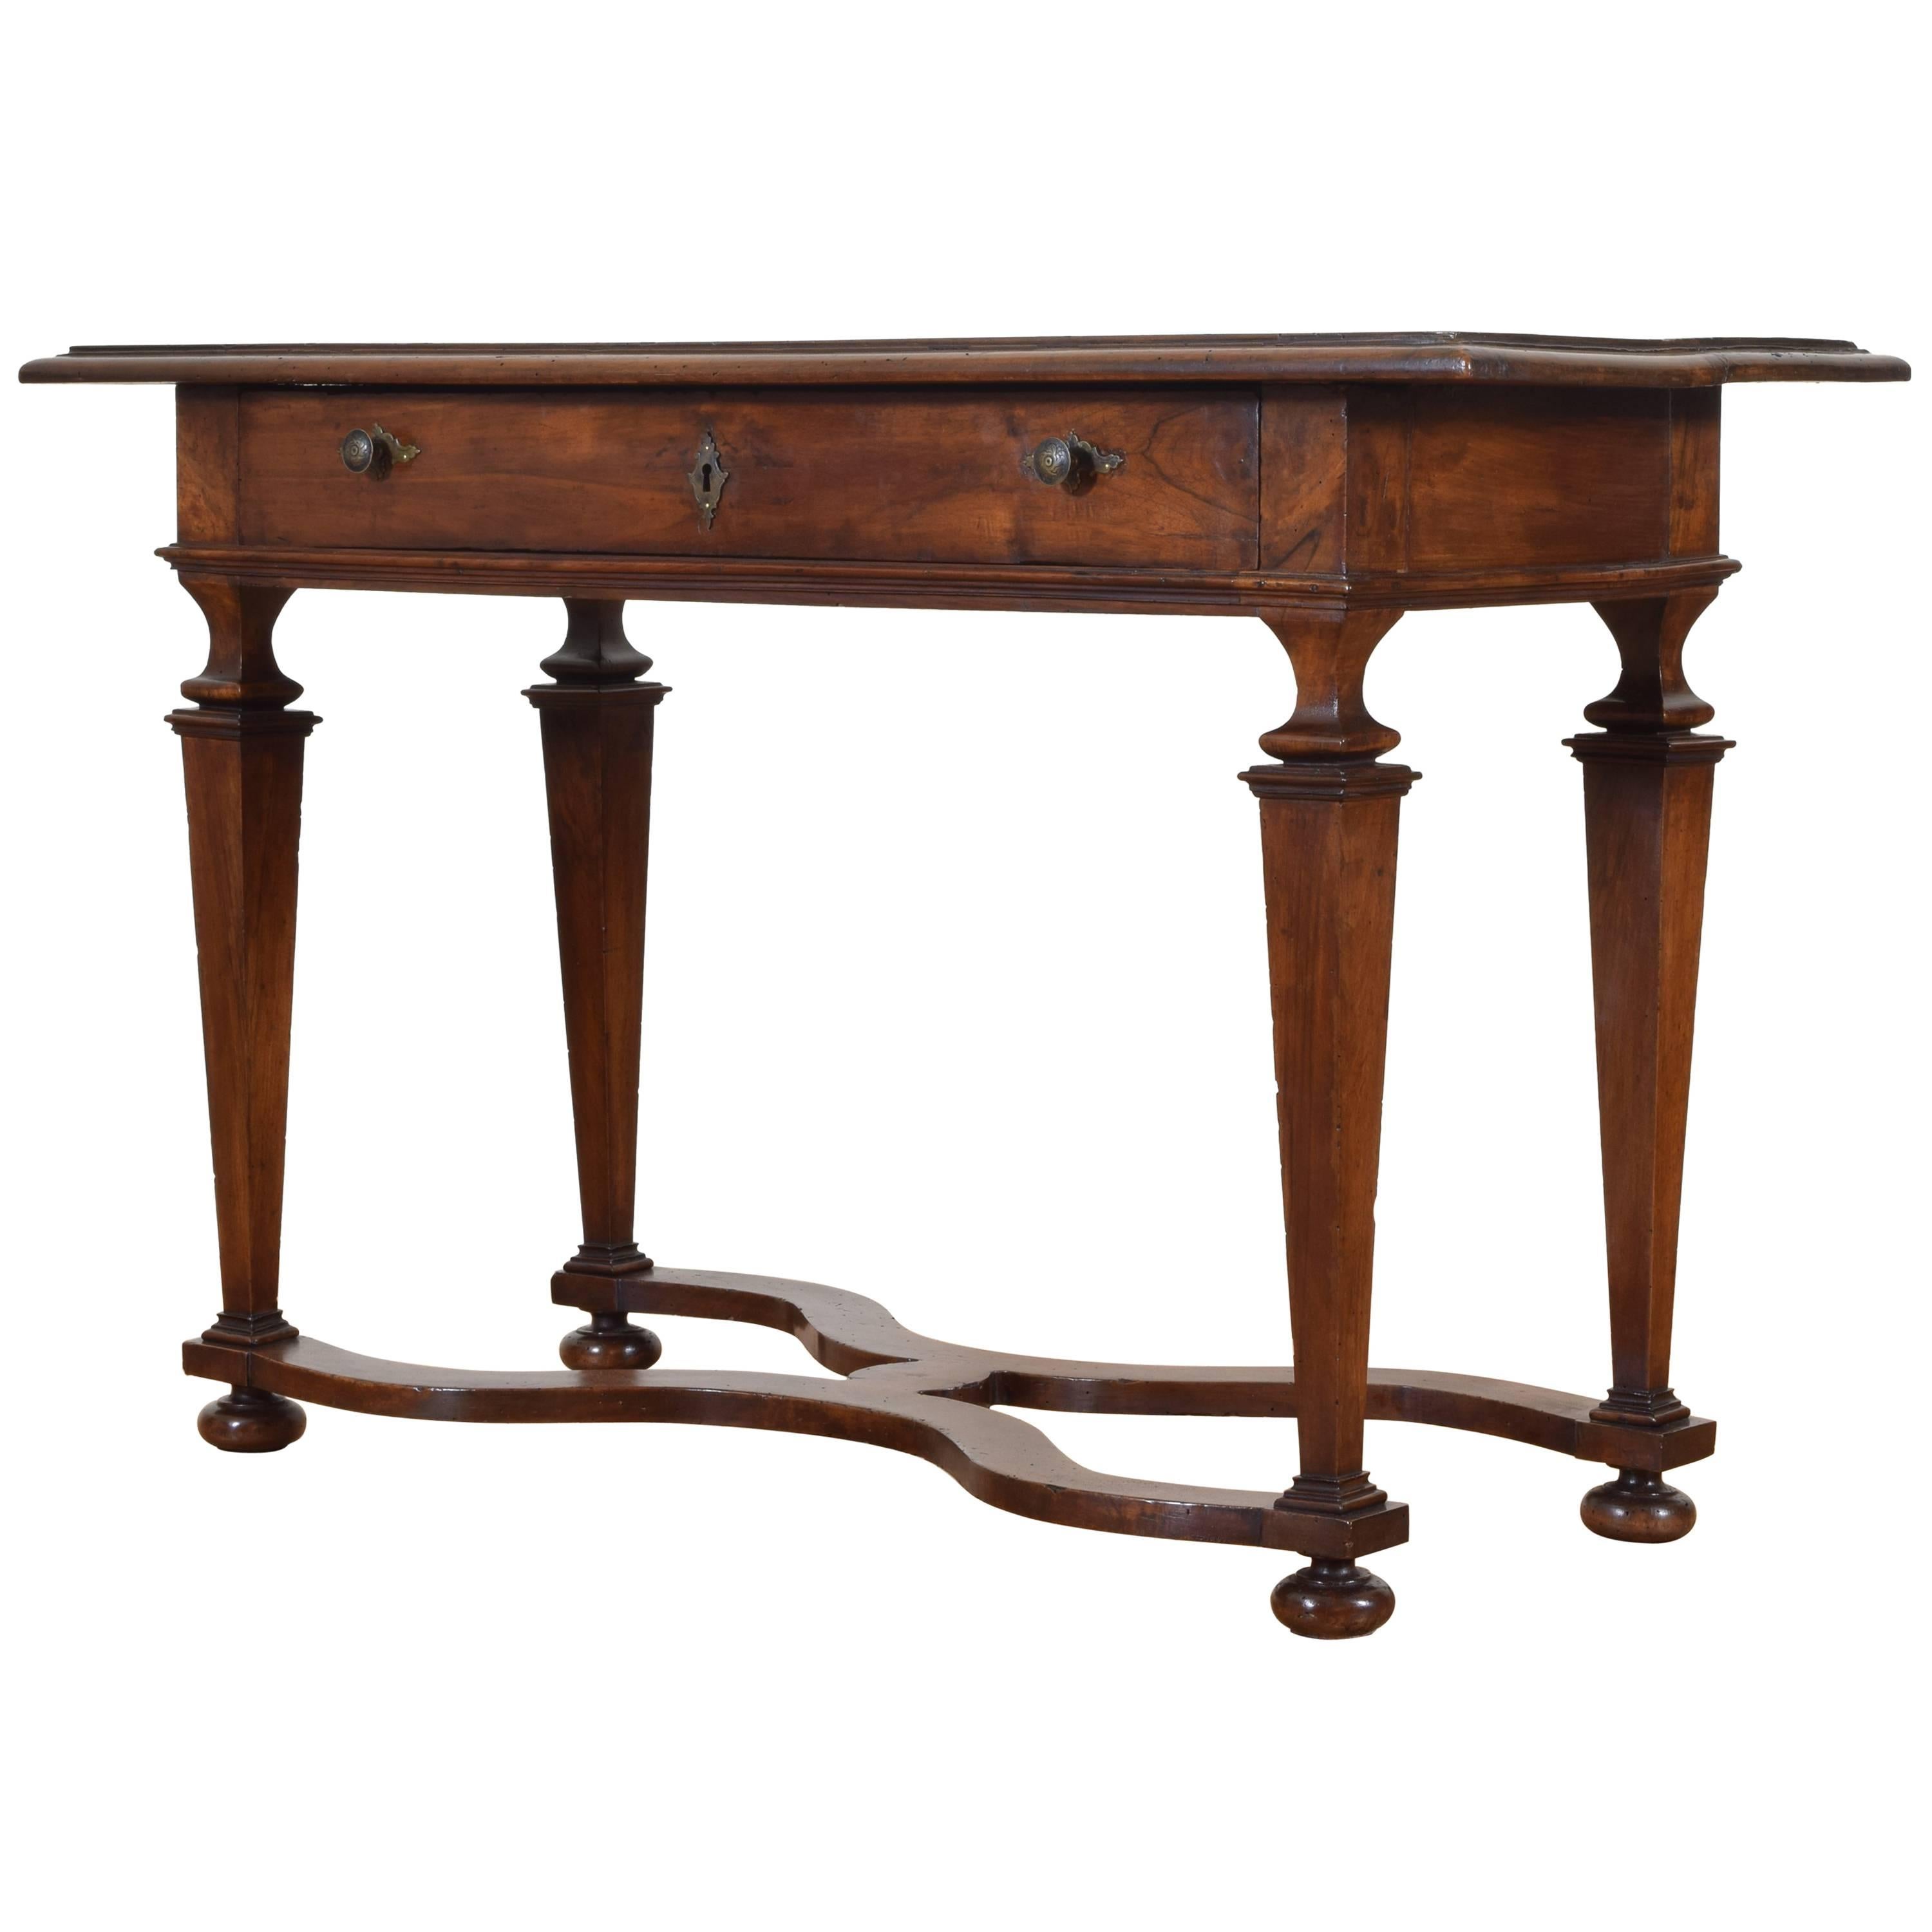 Italian Louis XIV Period Walnut One Drawer Console Table, Early 18th Century